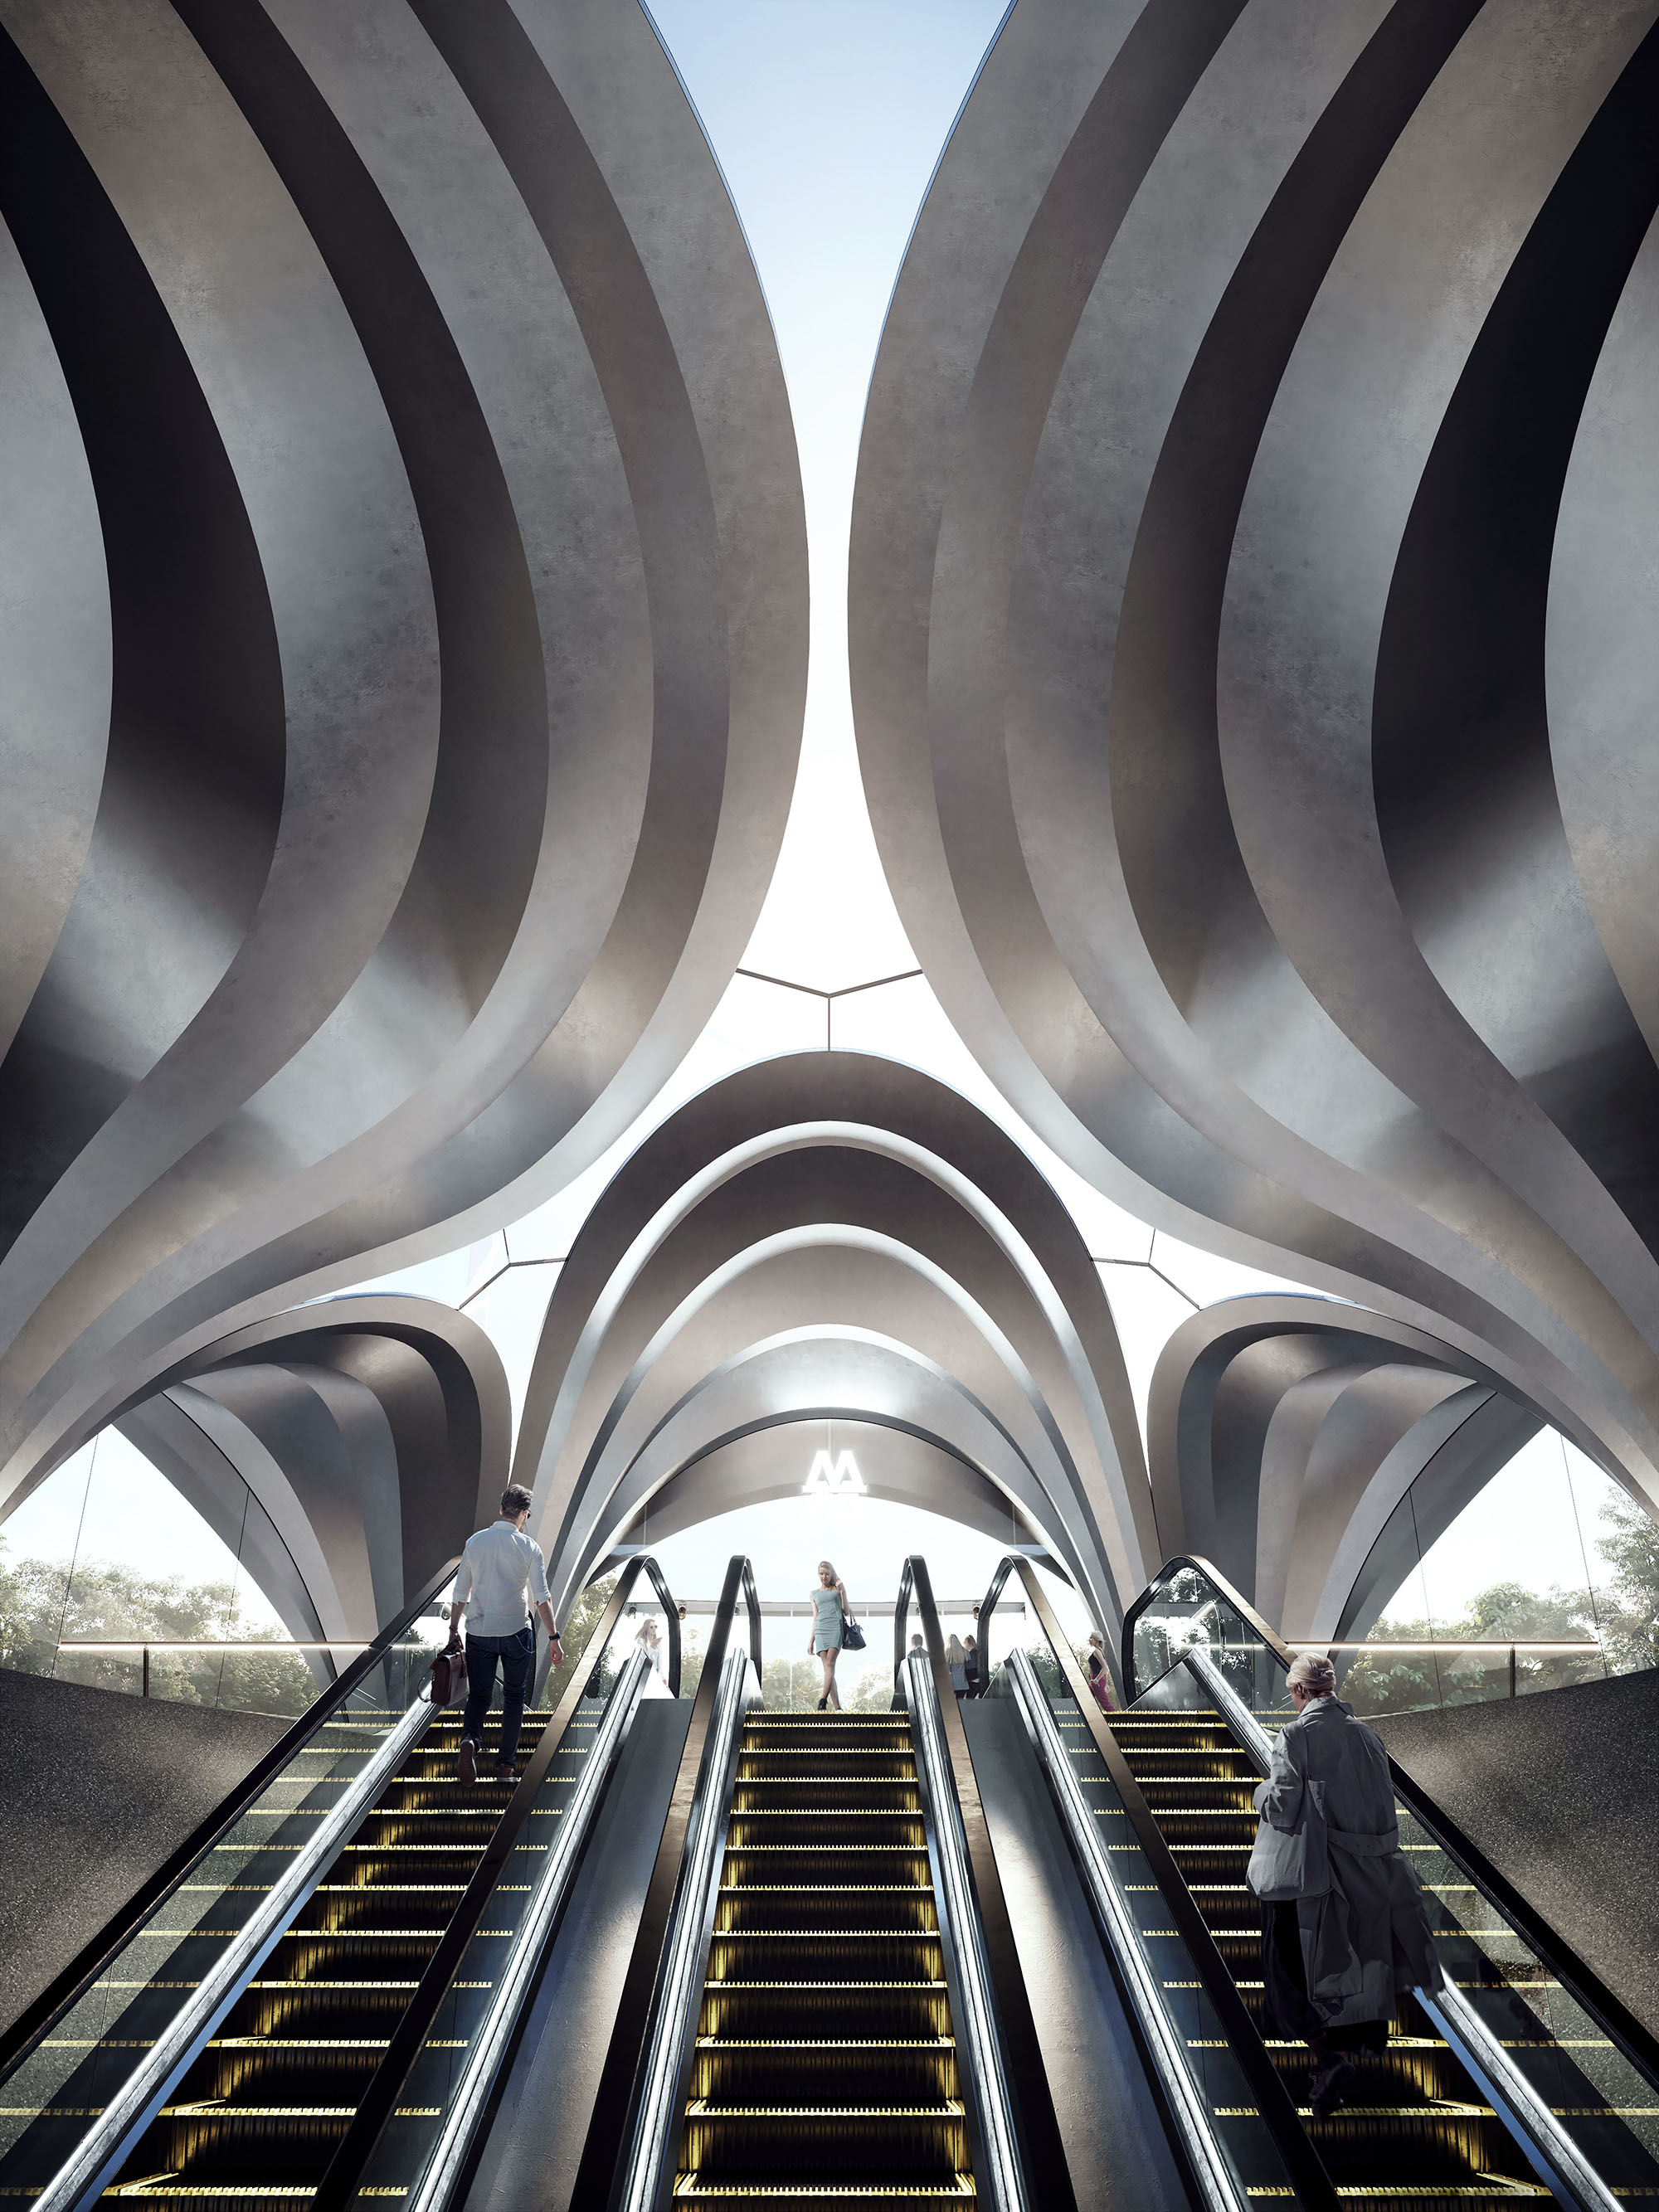 4_ZHA_Dnipro Metro Stations_Central_Canopy_Render by OmegaRender